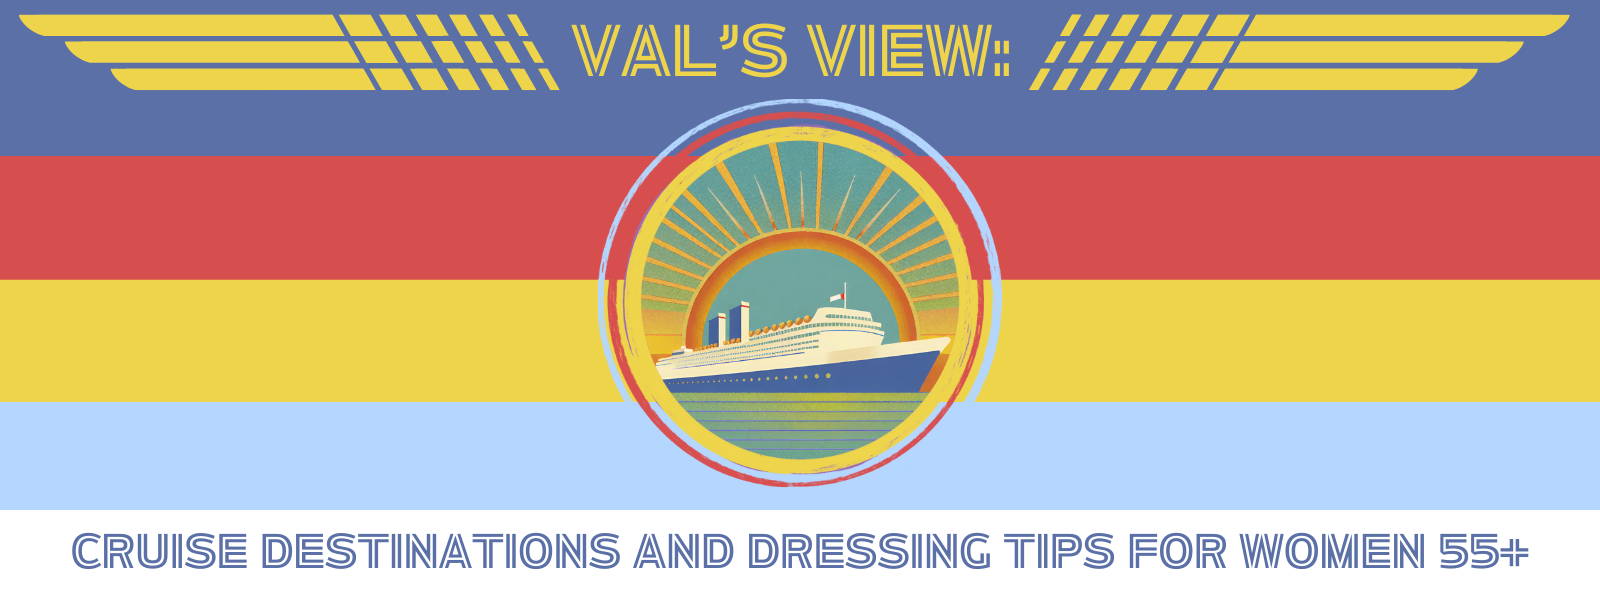 Val's View: Cruise Destinations and Dressing Tips for Women 55+